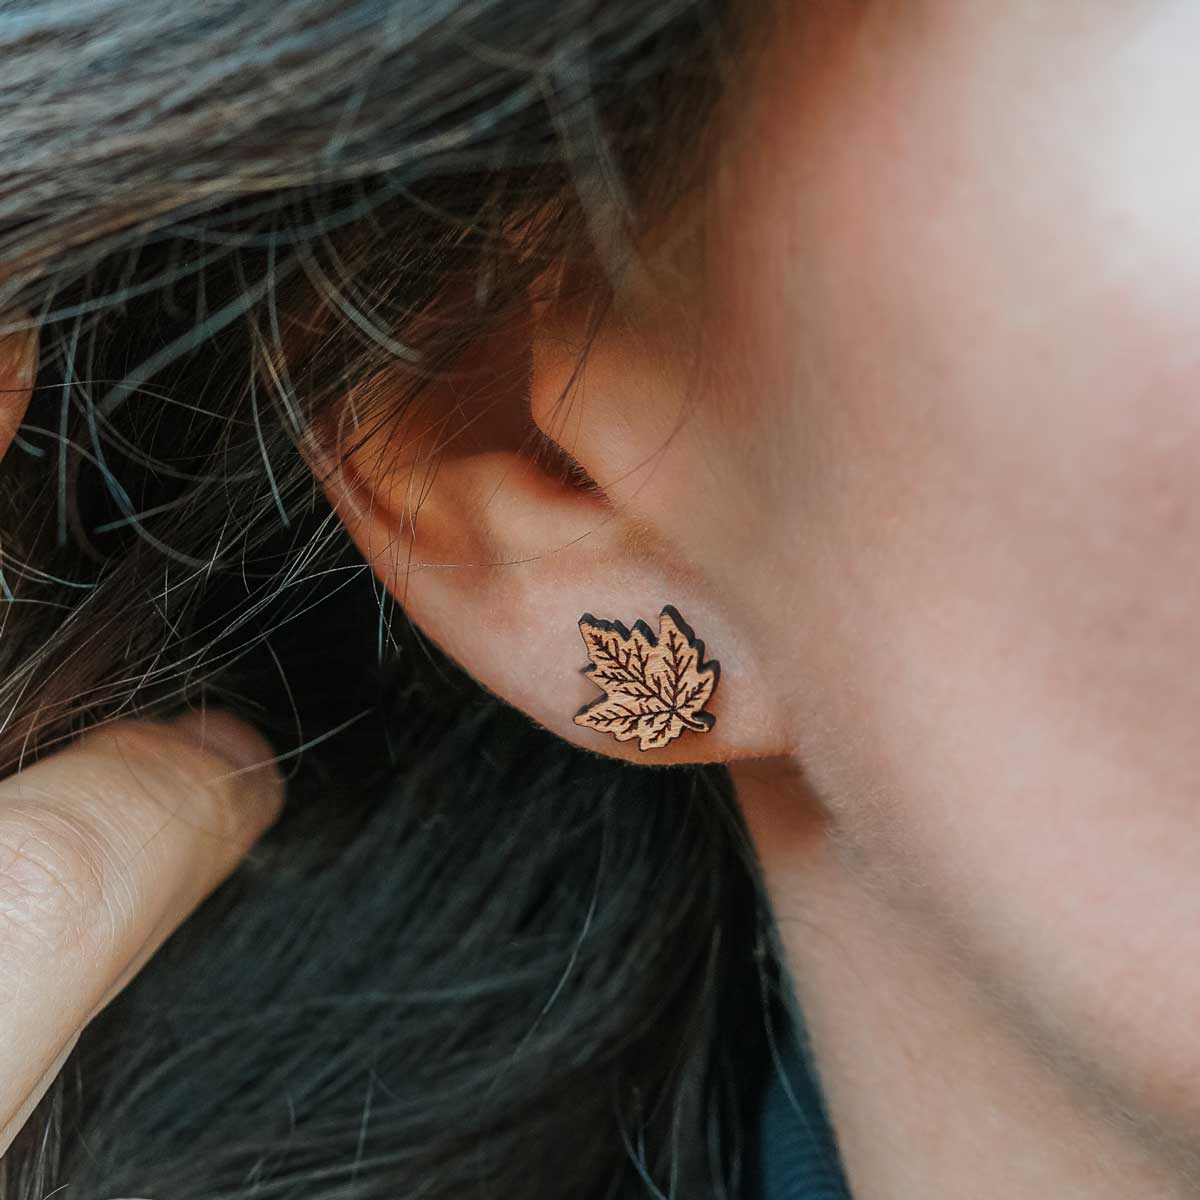 Wooden ear studs with maple leaf design